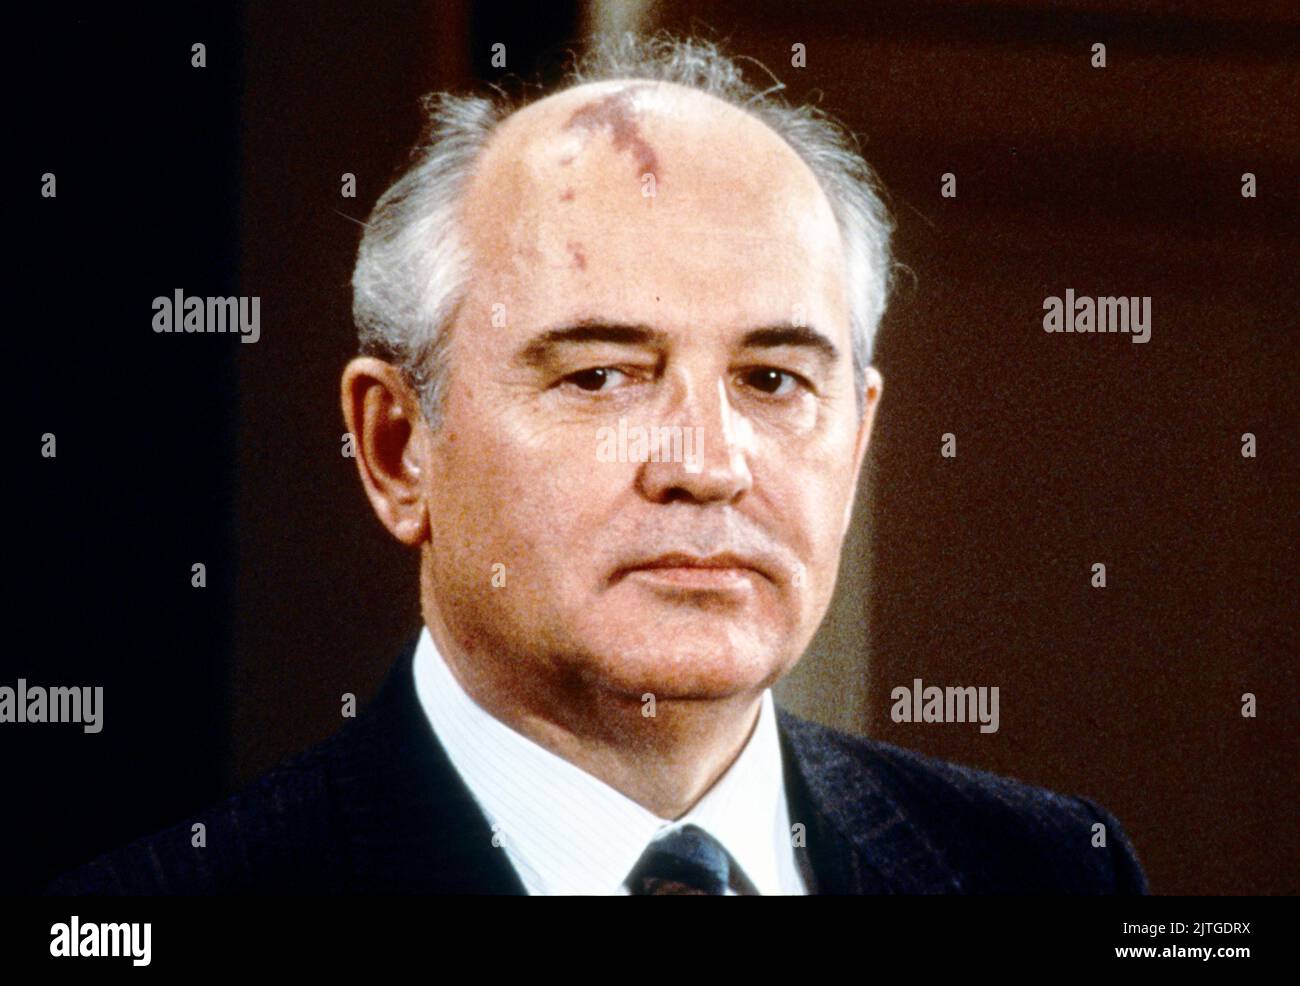 **FILE PHOTO** Mikhail Gorbachev Has Passed Away. President Mikhail Gorbachev of the Soviet Union in the East Room of the White House in Washington, DC for the signing of the Intermediate-Range Nuclear Forces (INF) treaty with United States President Ronald Reagan on December 8, 1987. The agreement eliminated US and Soviet intermediate-and shorter-range nuclear missles and led to the elimination of more nuclear weapons. Credit: Jim Colburn/Pool via CNP /MediaPunch Stock Photo